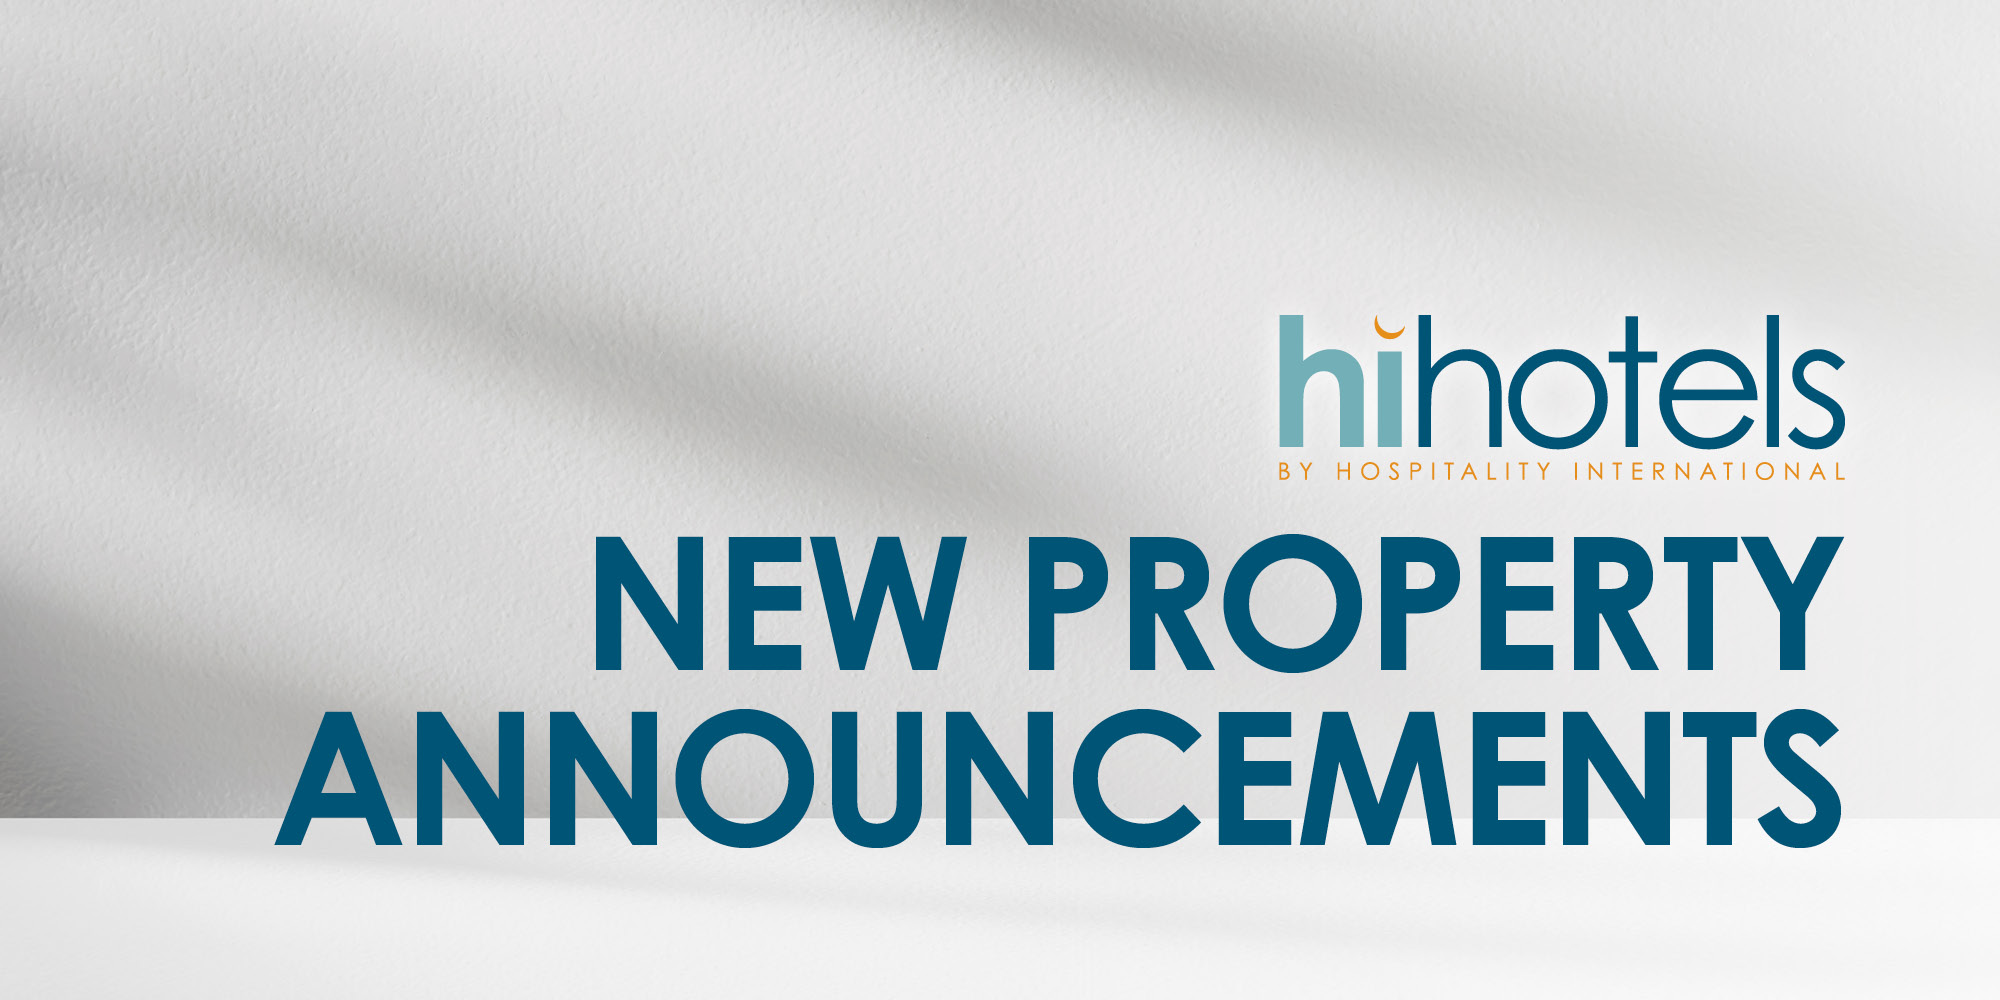 hihotels-hero-image-property-announcements